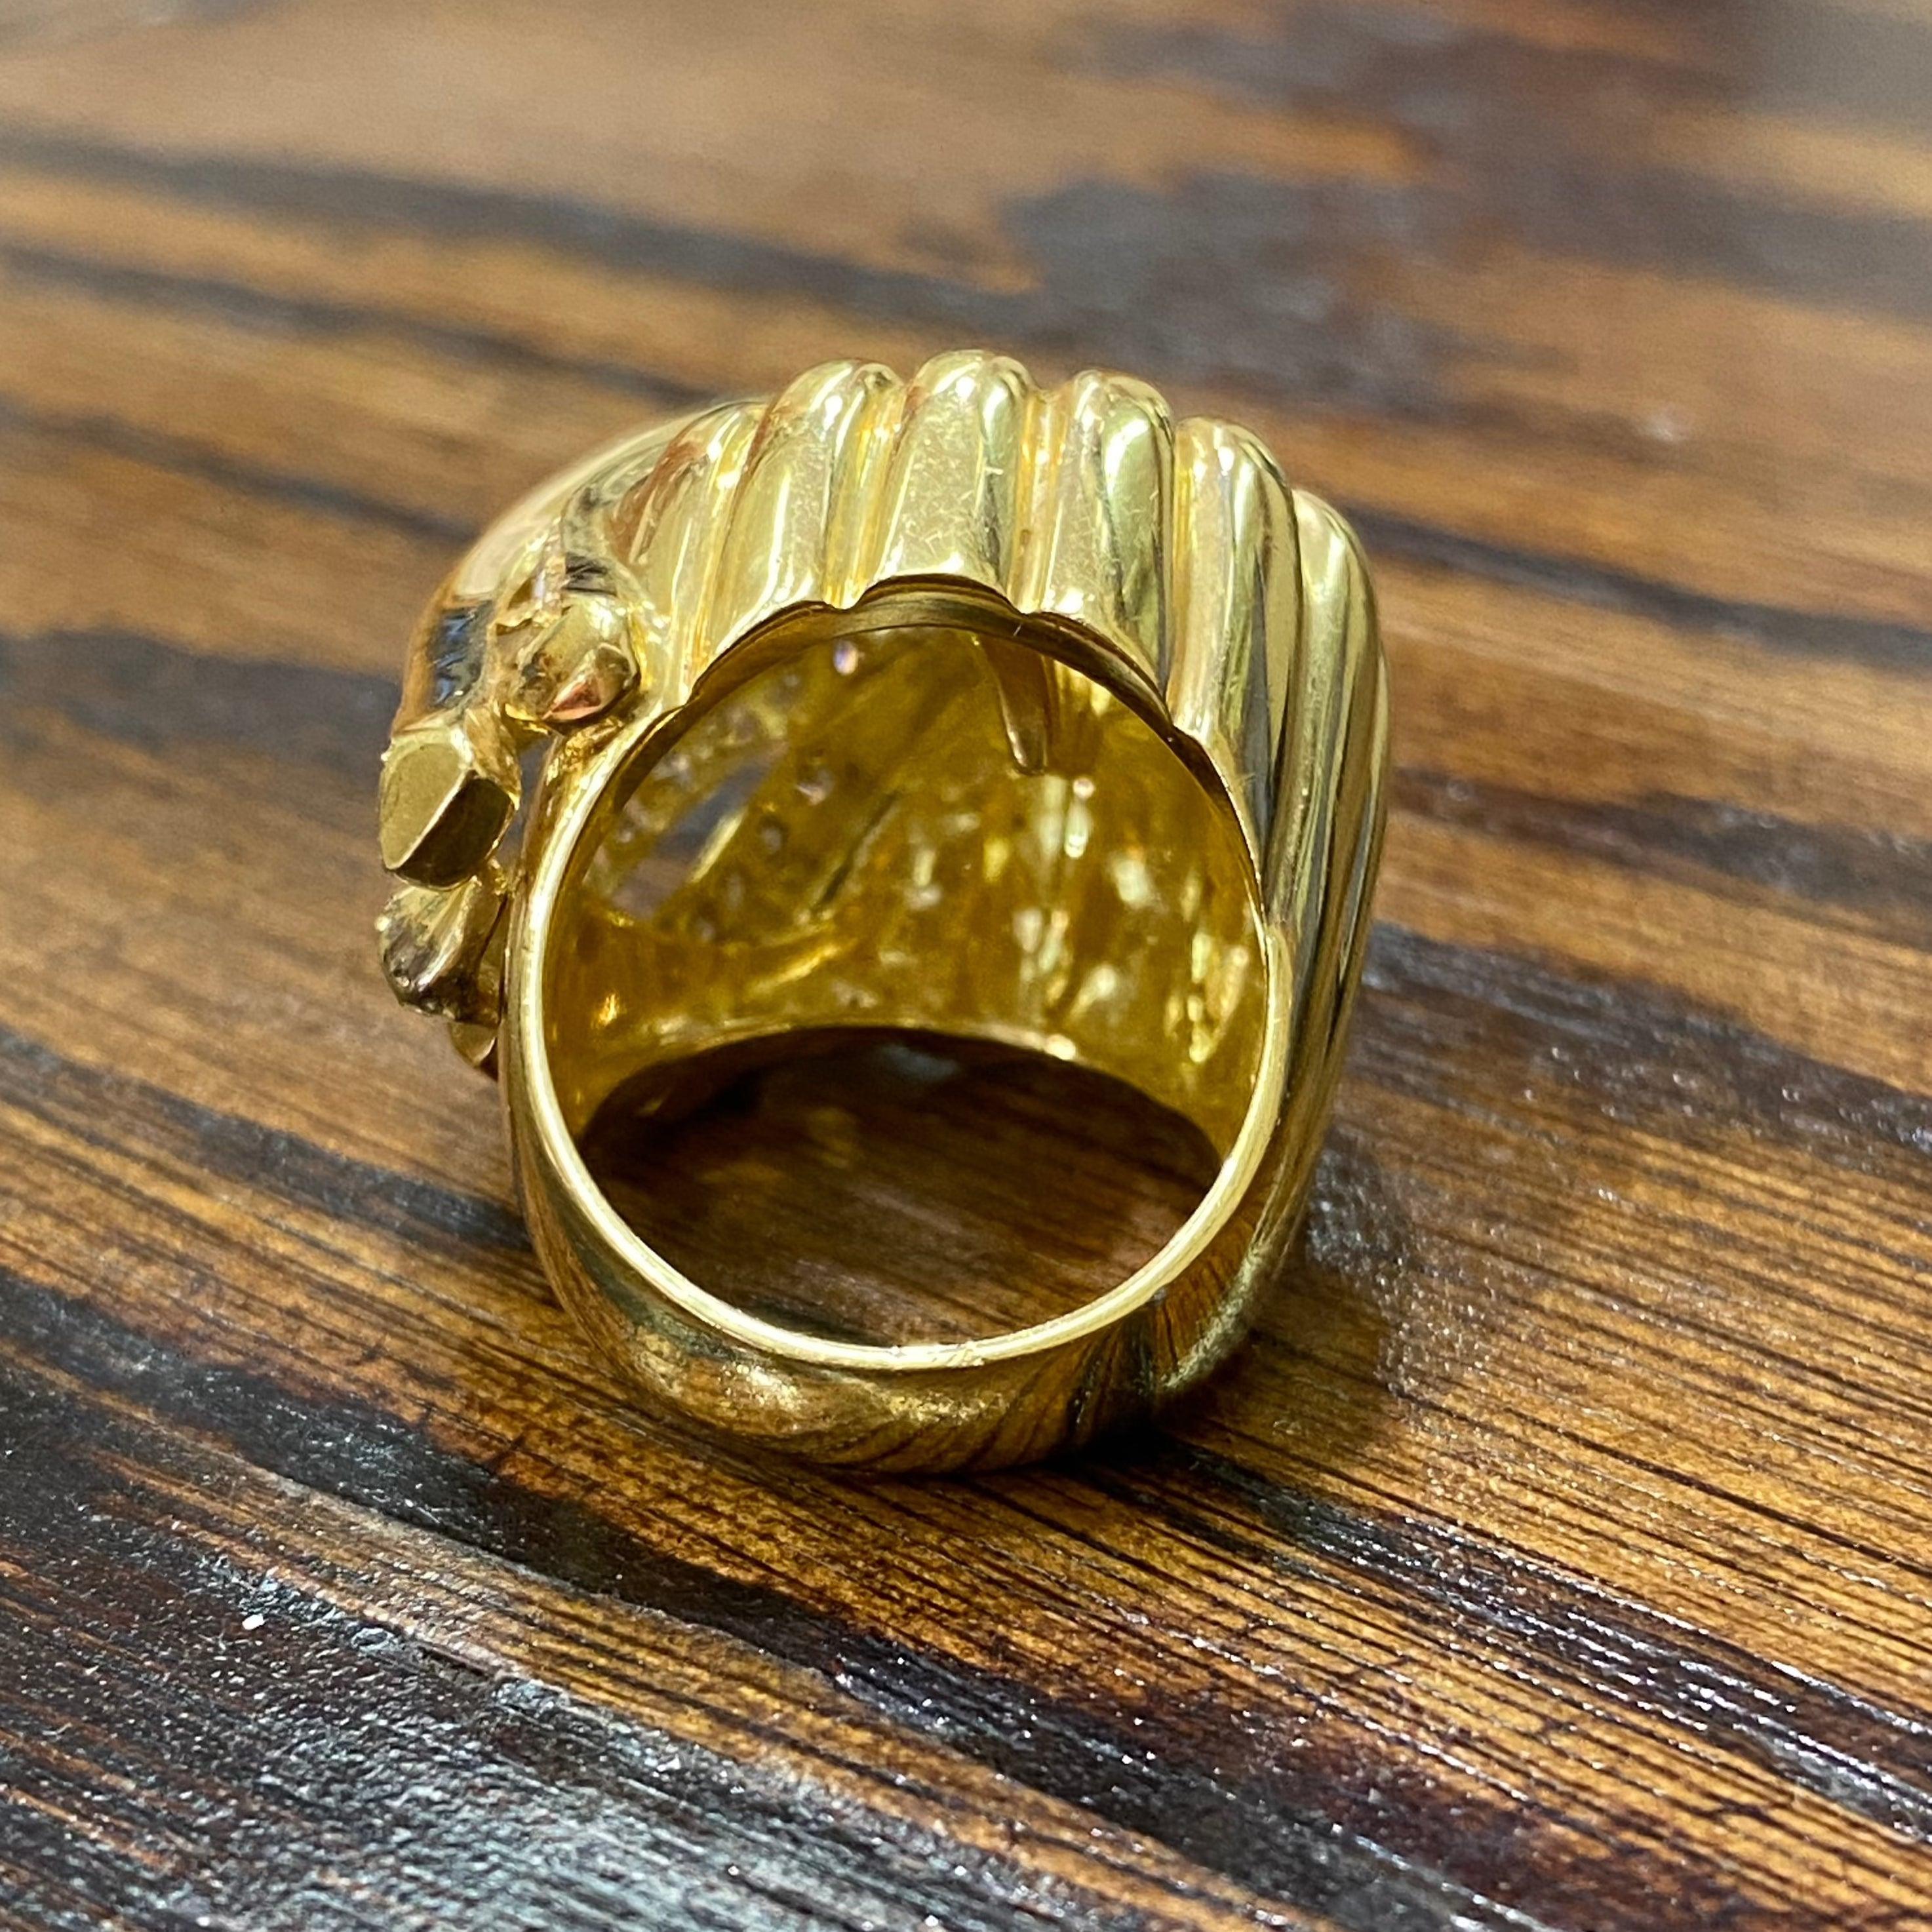 Vintage 18K Gold Large Waterfall Diamond Cocktail Ring In Good Condition For Sale In Henderson, NV